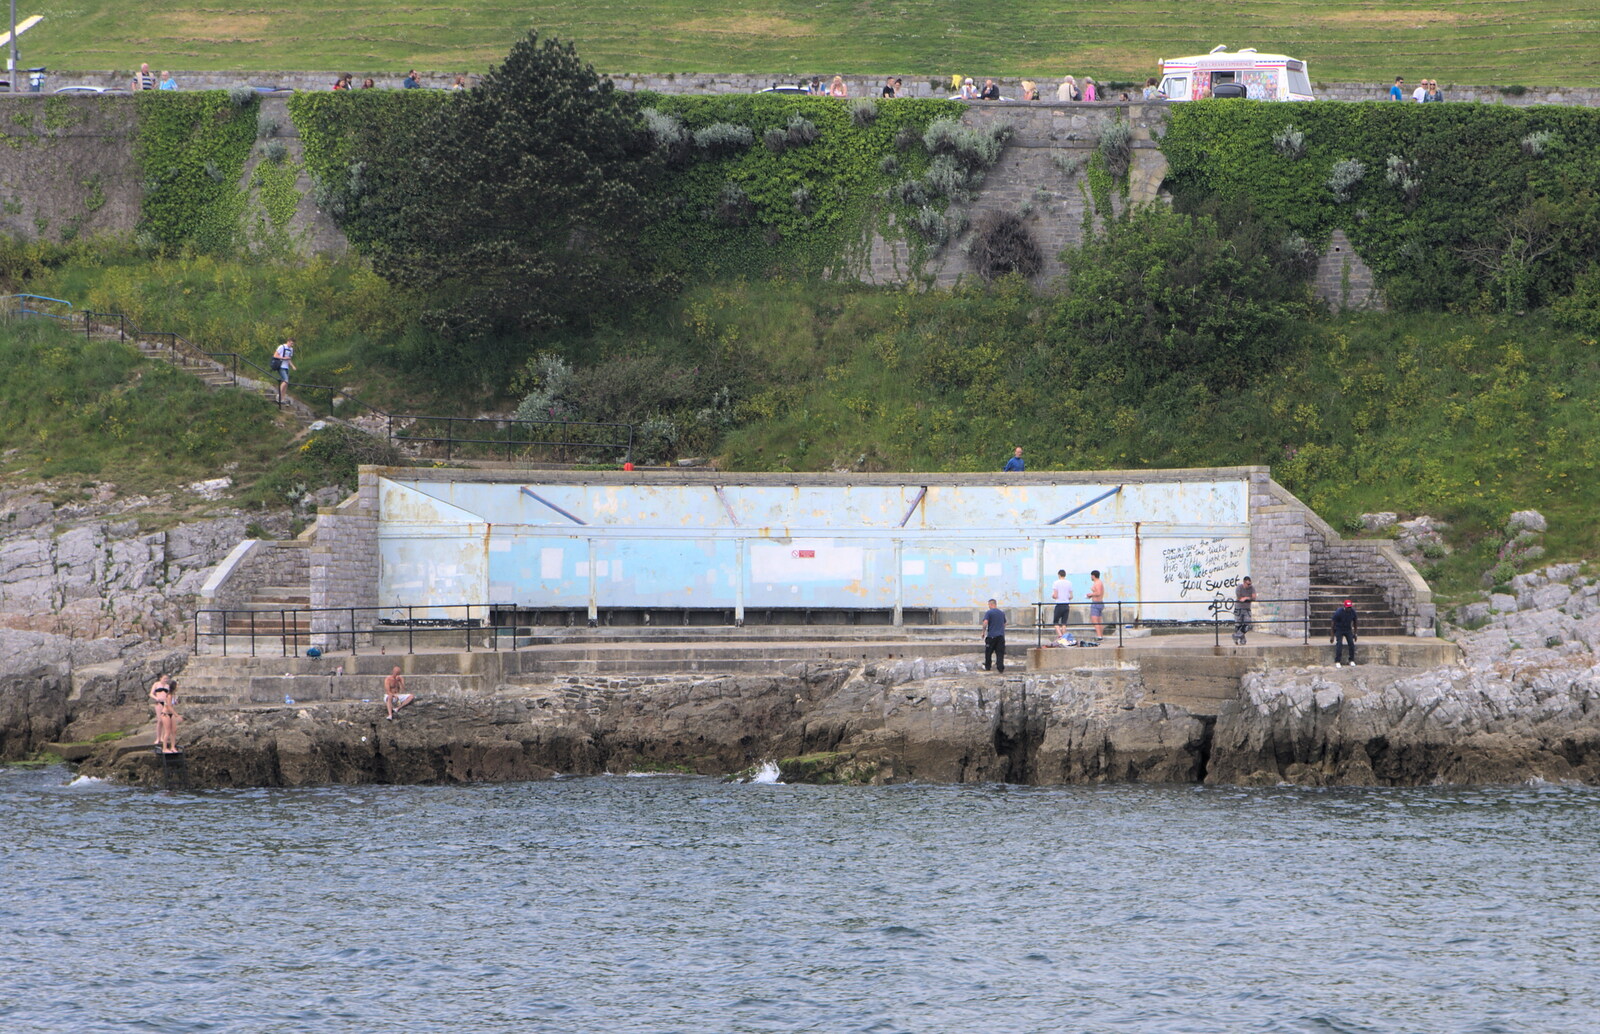 A derelict swimming construction from A Tamar River Trip, Plymouth, Devon - 30th May 2016